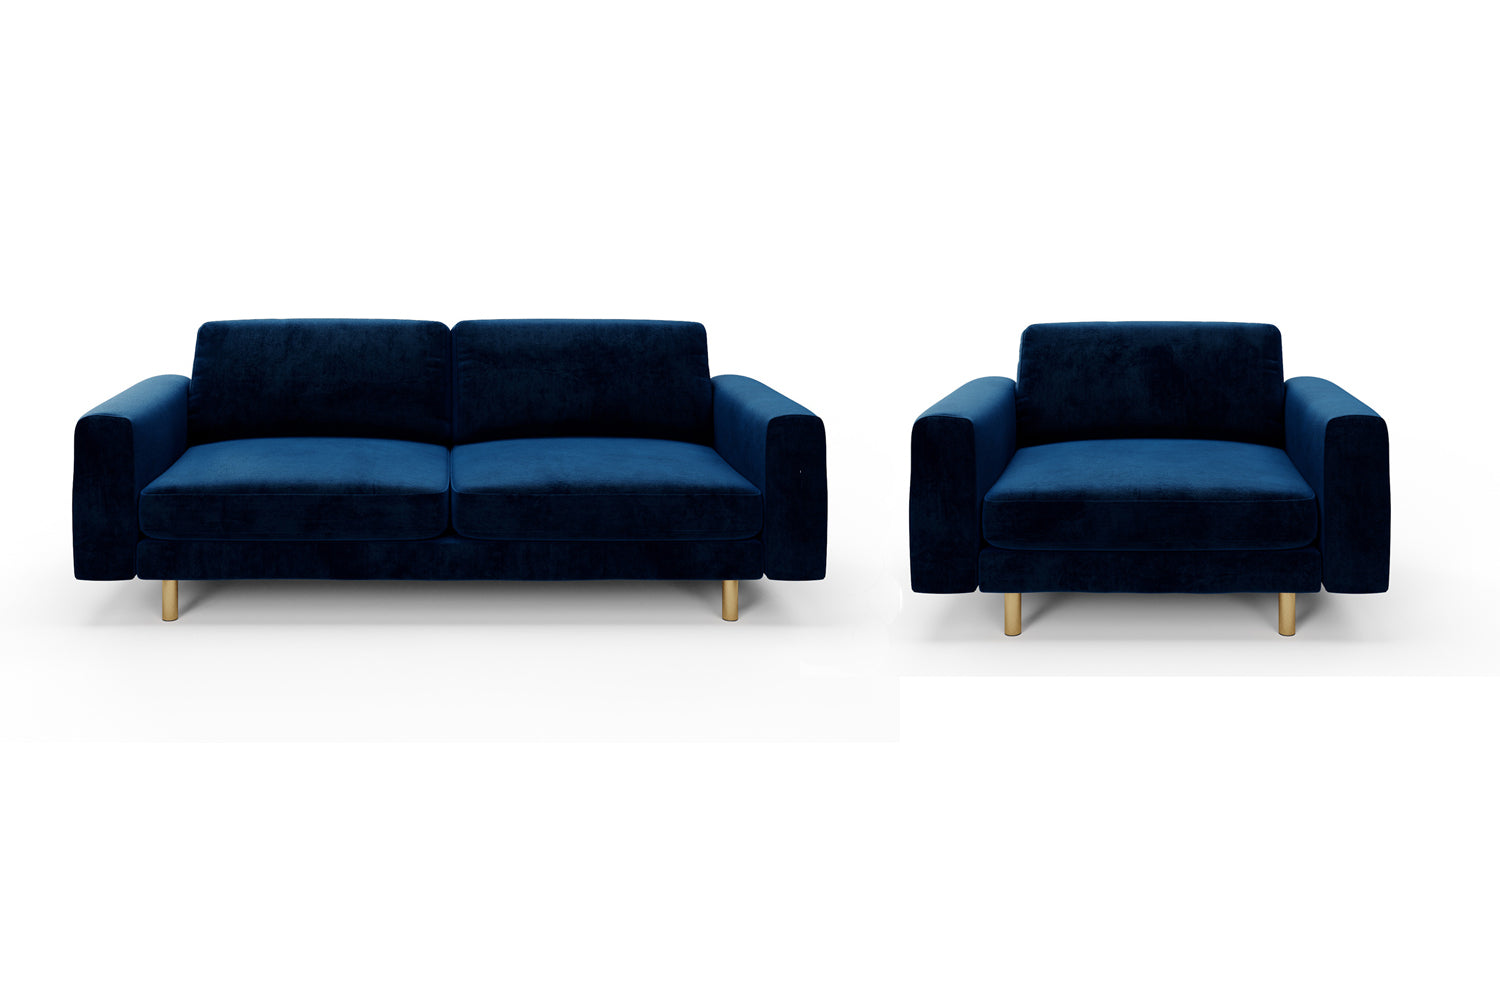 The Big Chill - 3 Seater Sofa and 1.5 Seater Snuggler Set - Navy